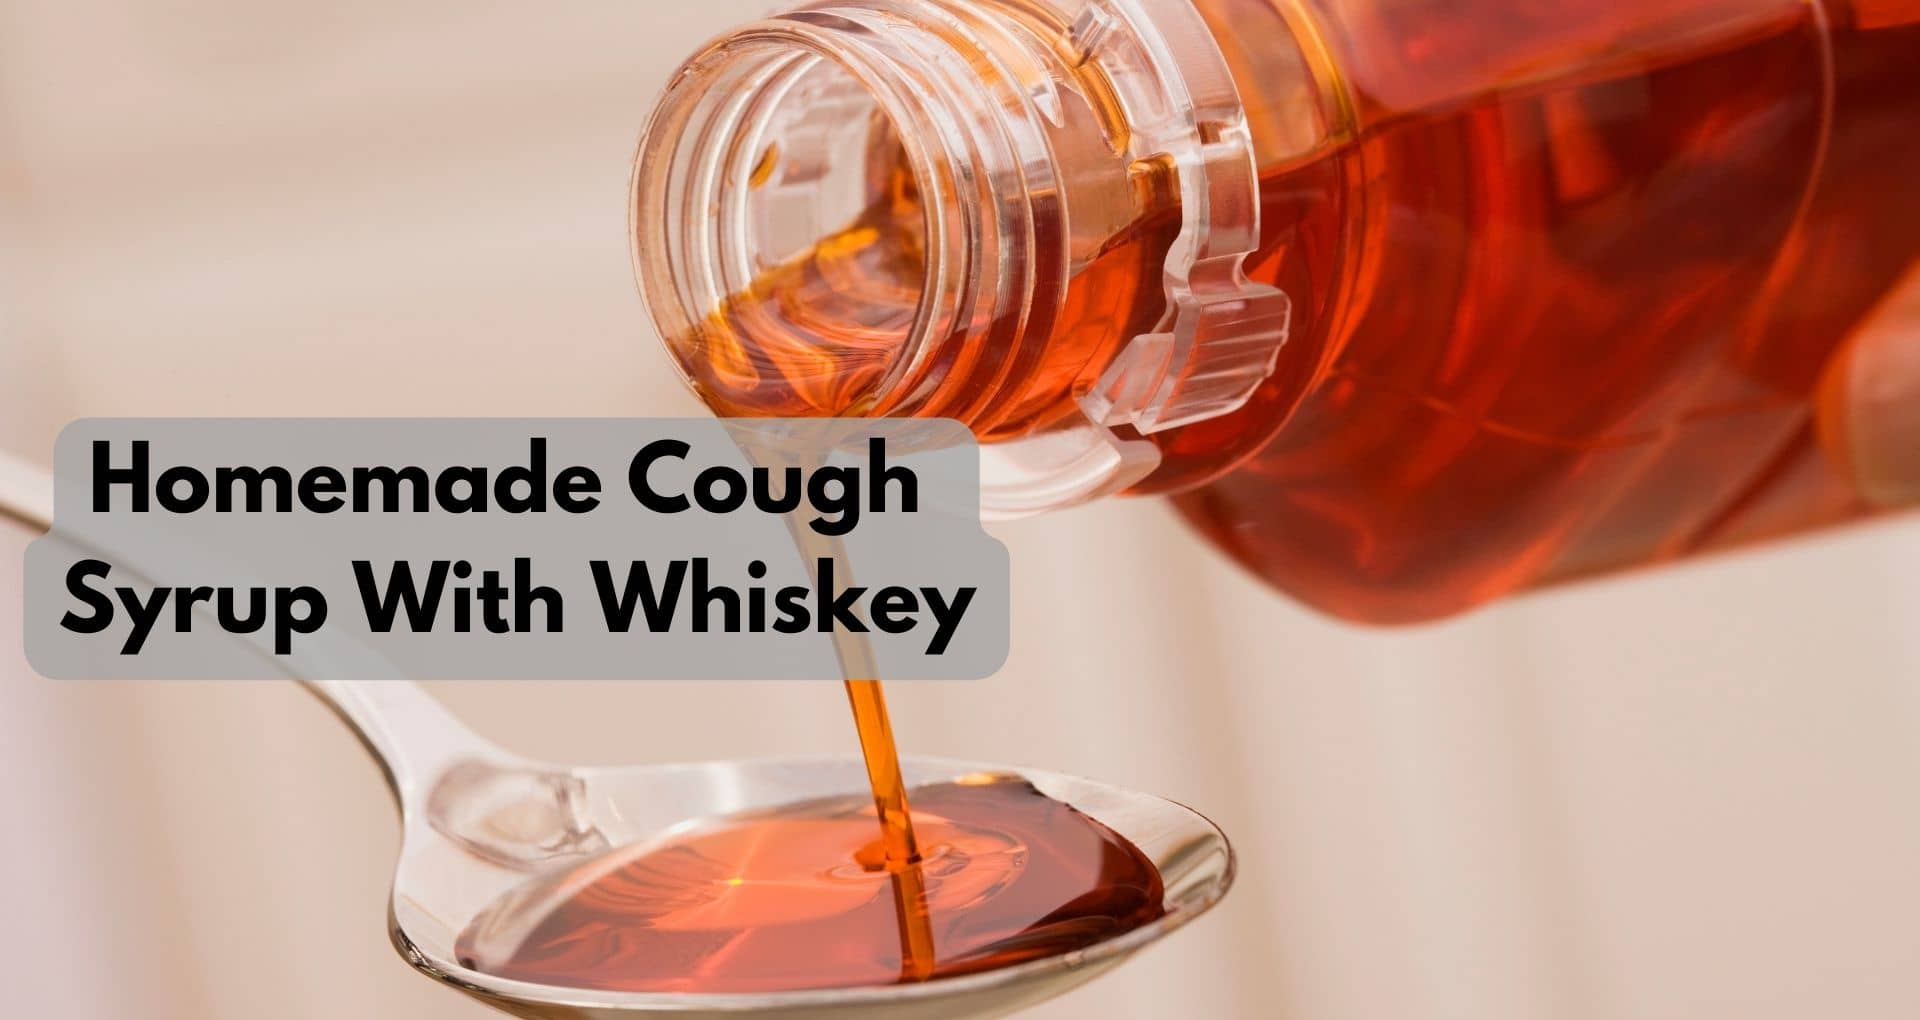 How To Make Homemade Cough Syrup With Whiskey?